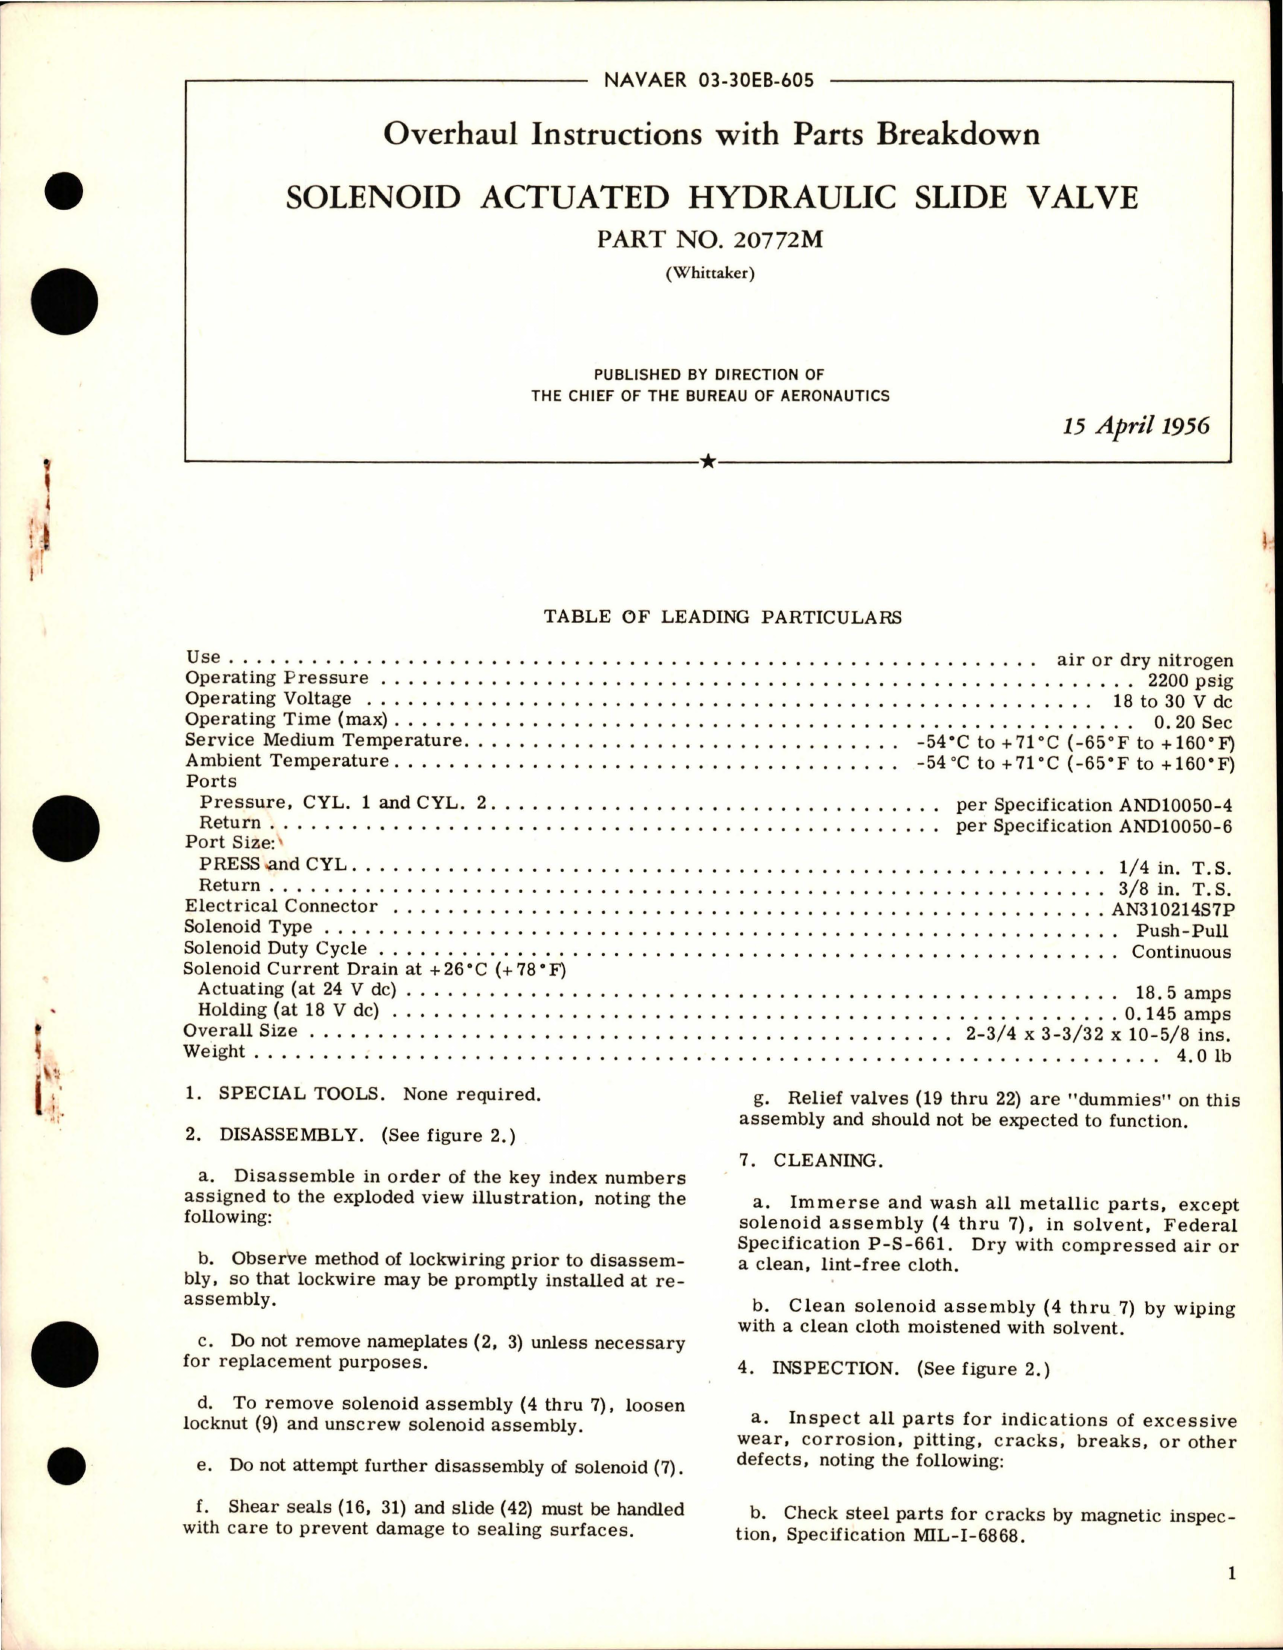 Sample page 1 from AirCorps Library document: Overhaul Instructions with Parts Breakdown for Solenoid Actuated Hydraulic Slide Valve - Part 20772M